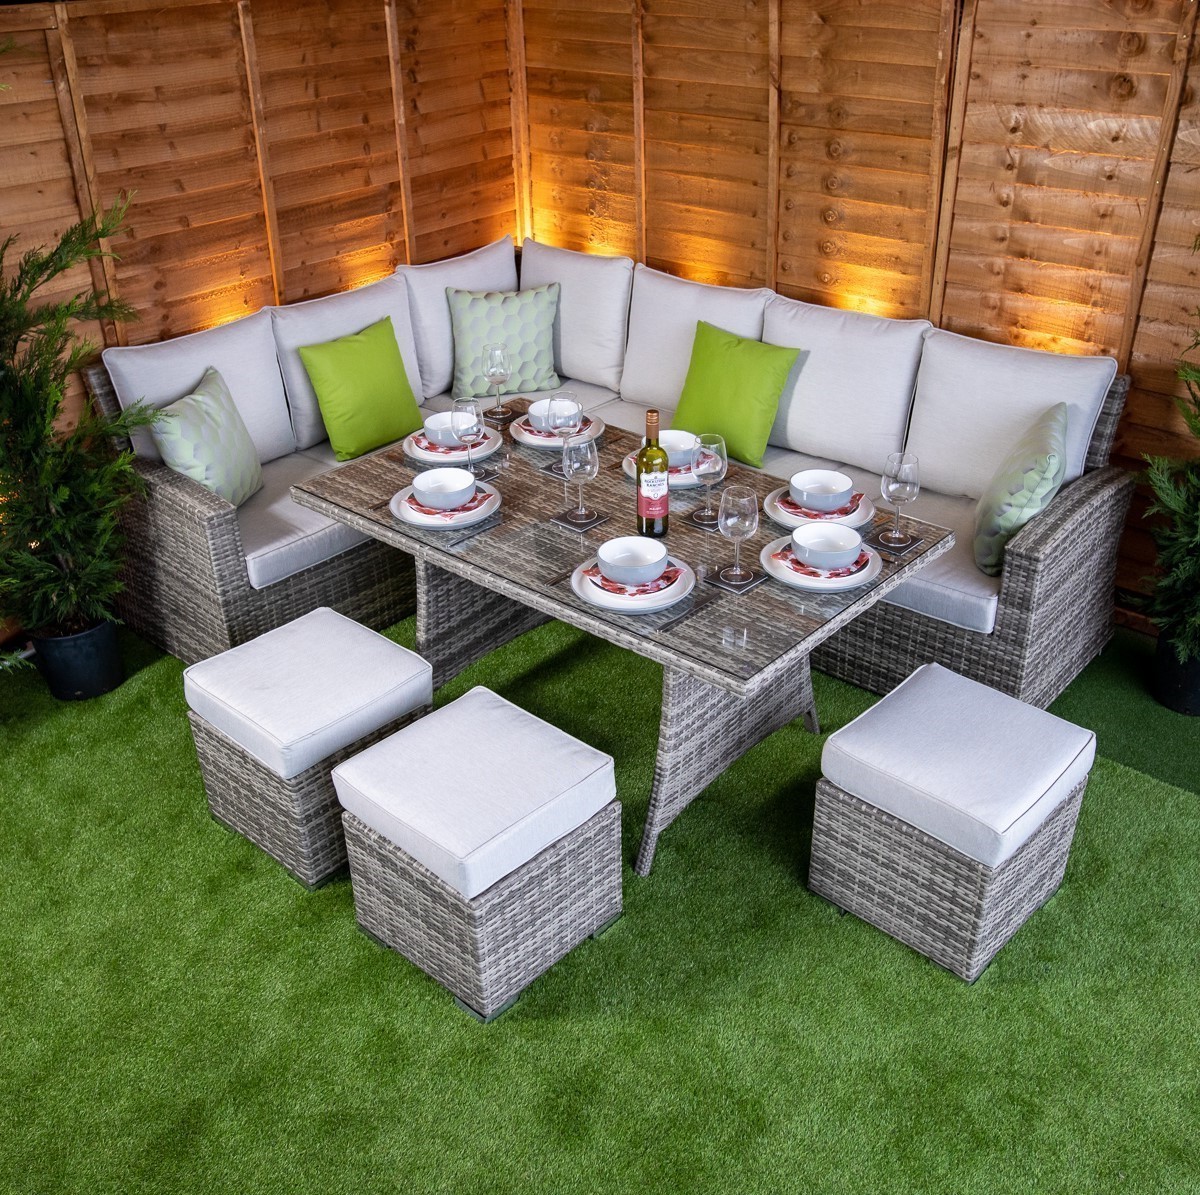 The Benefits of Rattan Furniture: Why It's Worth the Investment